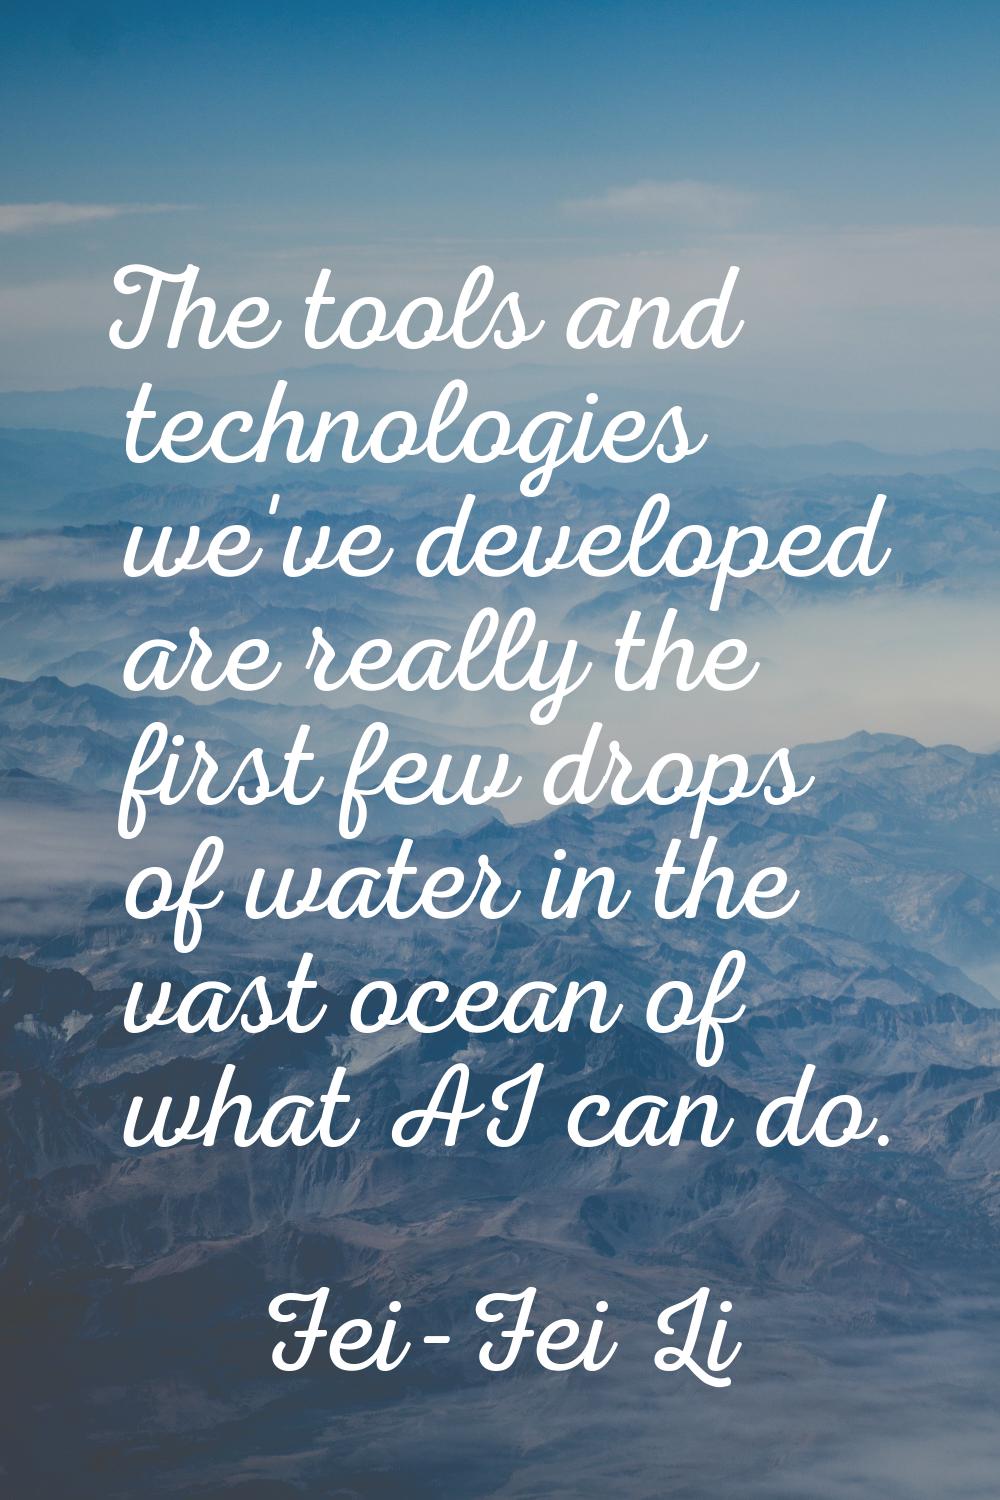 The tools and technologies we've developed are really the first few drops of water in the vast ocea